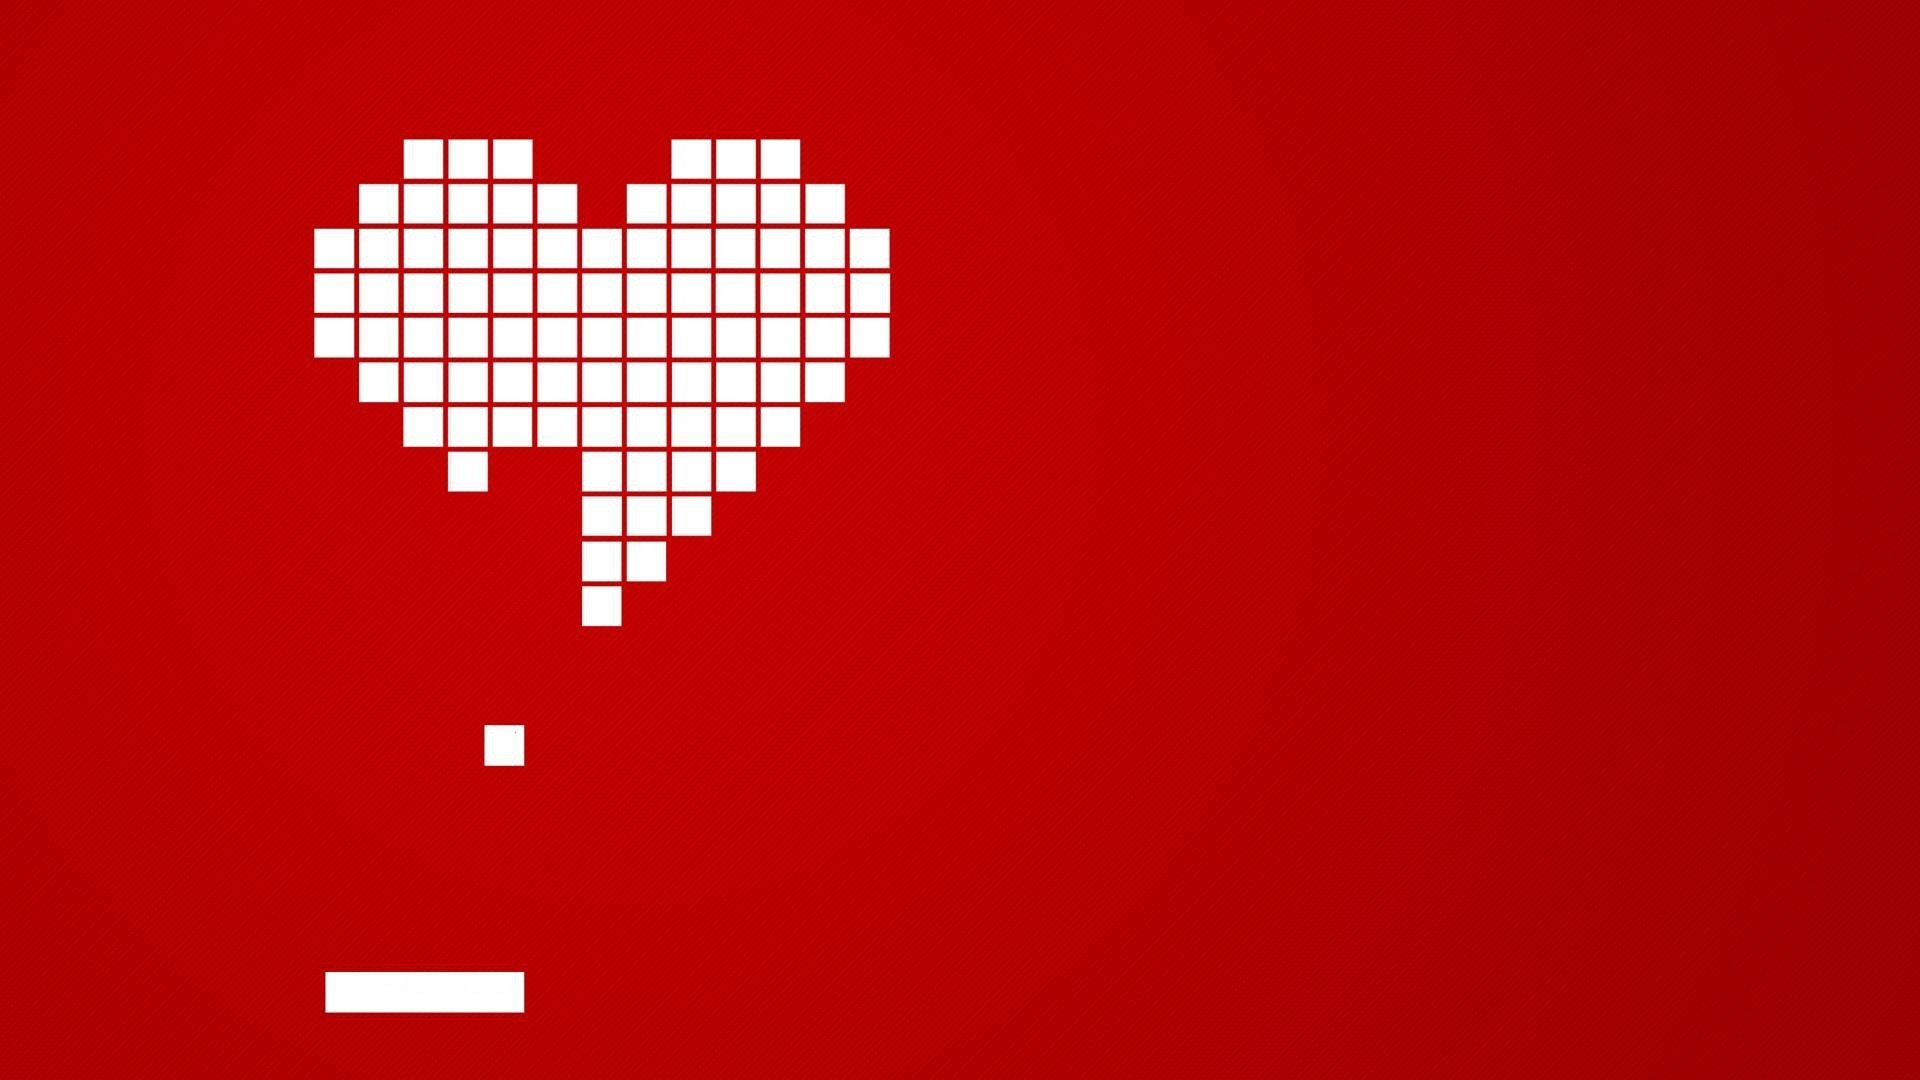 Brick, Hearts, Red background, Arkanoid Wallpaper